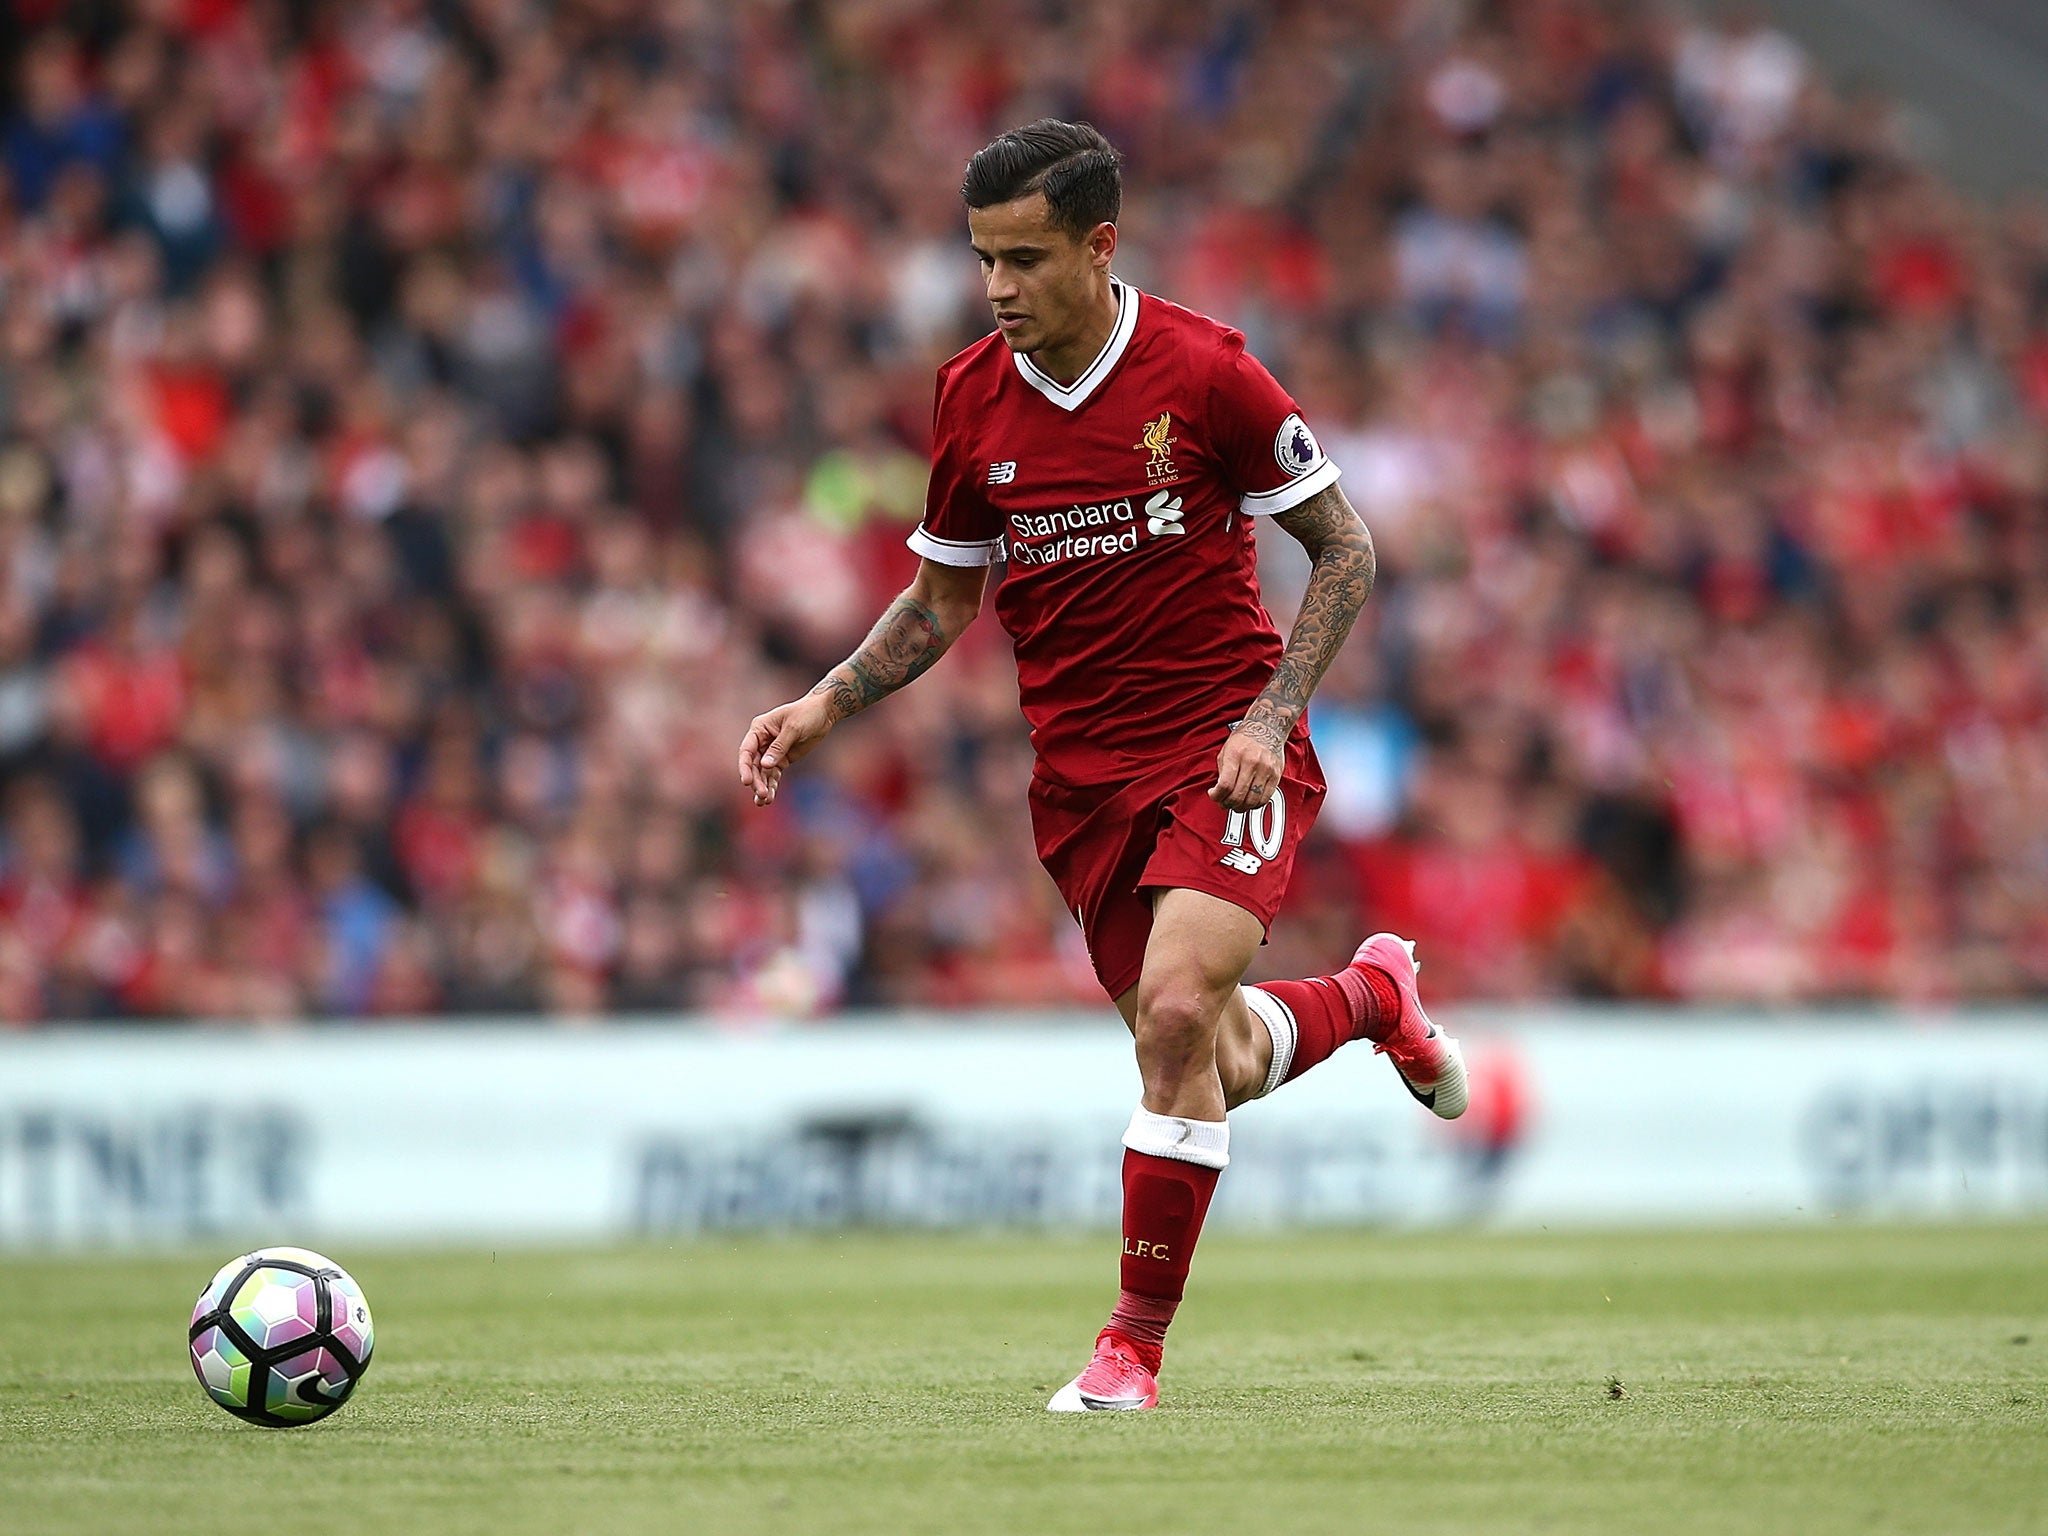 Coutinho in action for Liverpool against Middlesbrough on the last day of the season